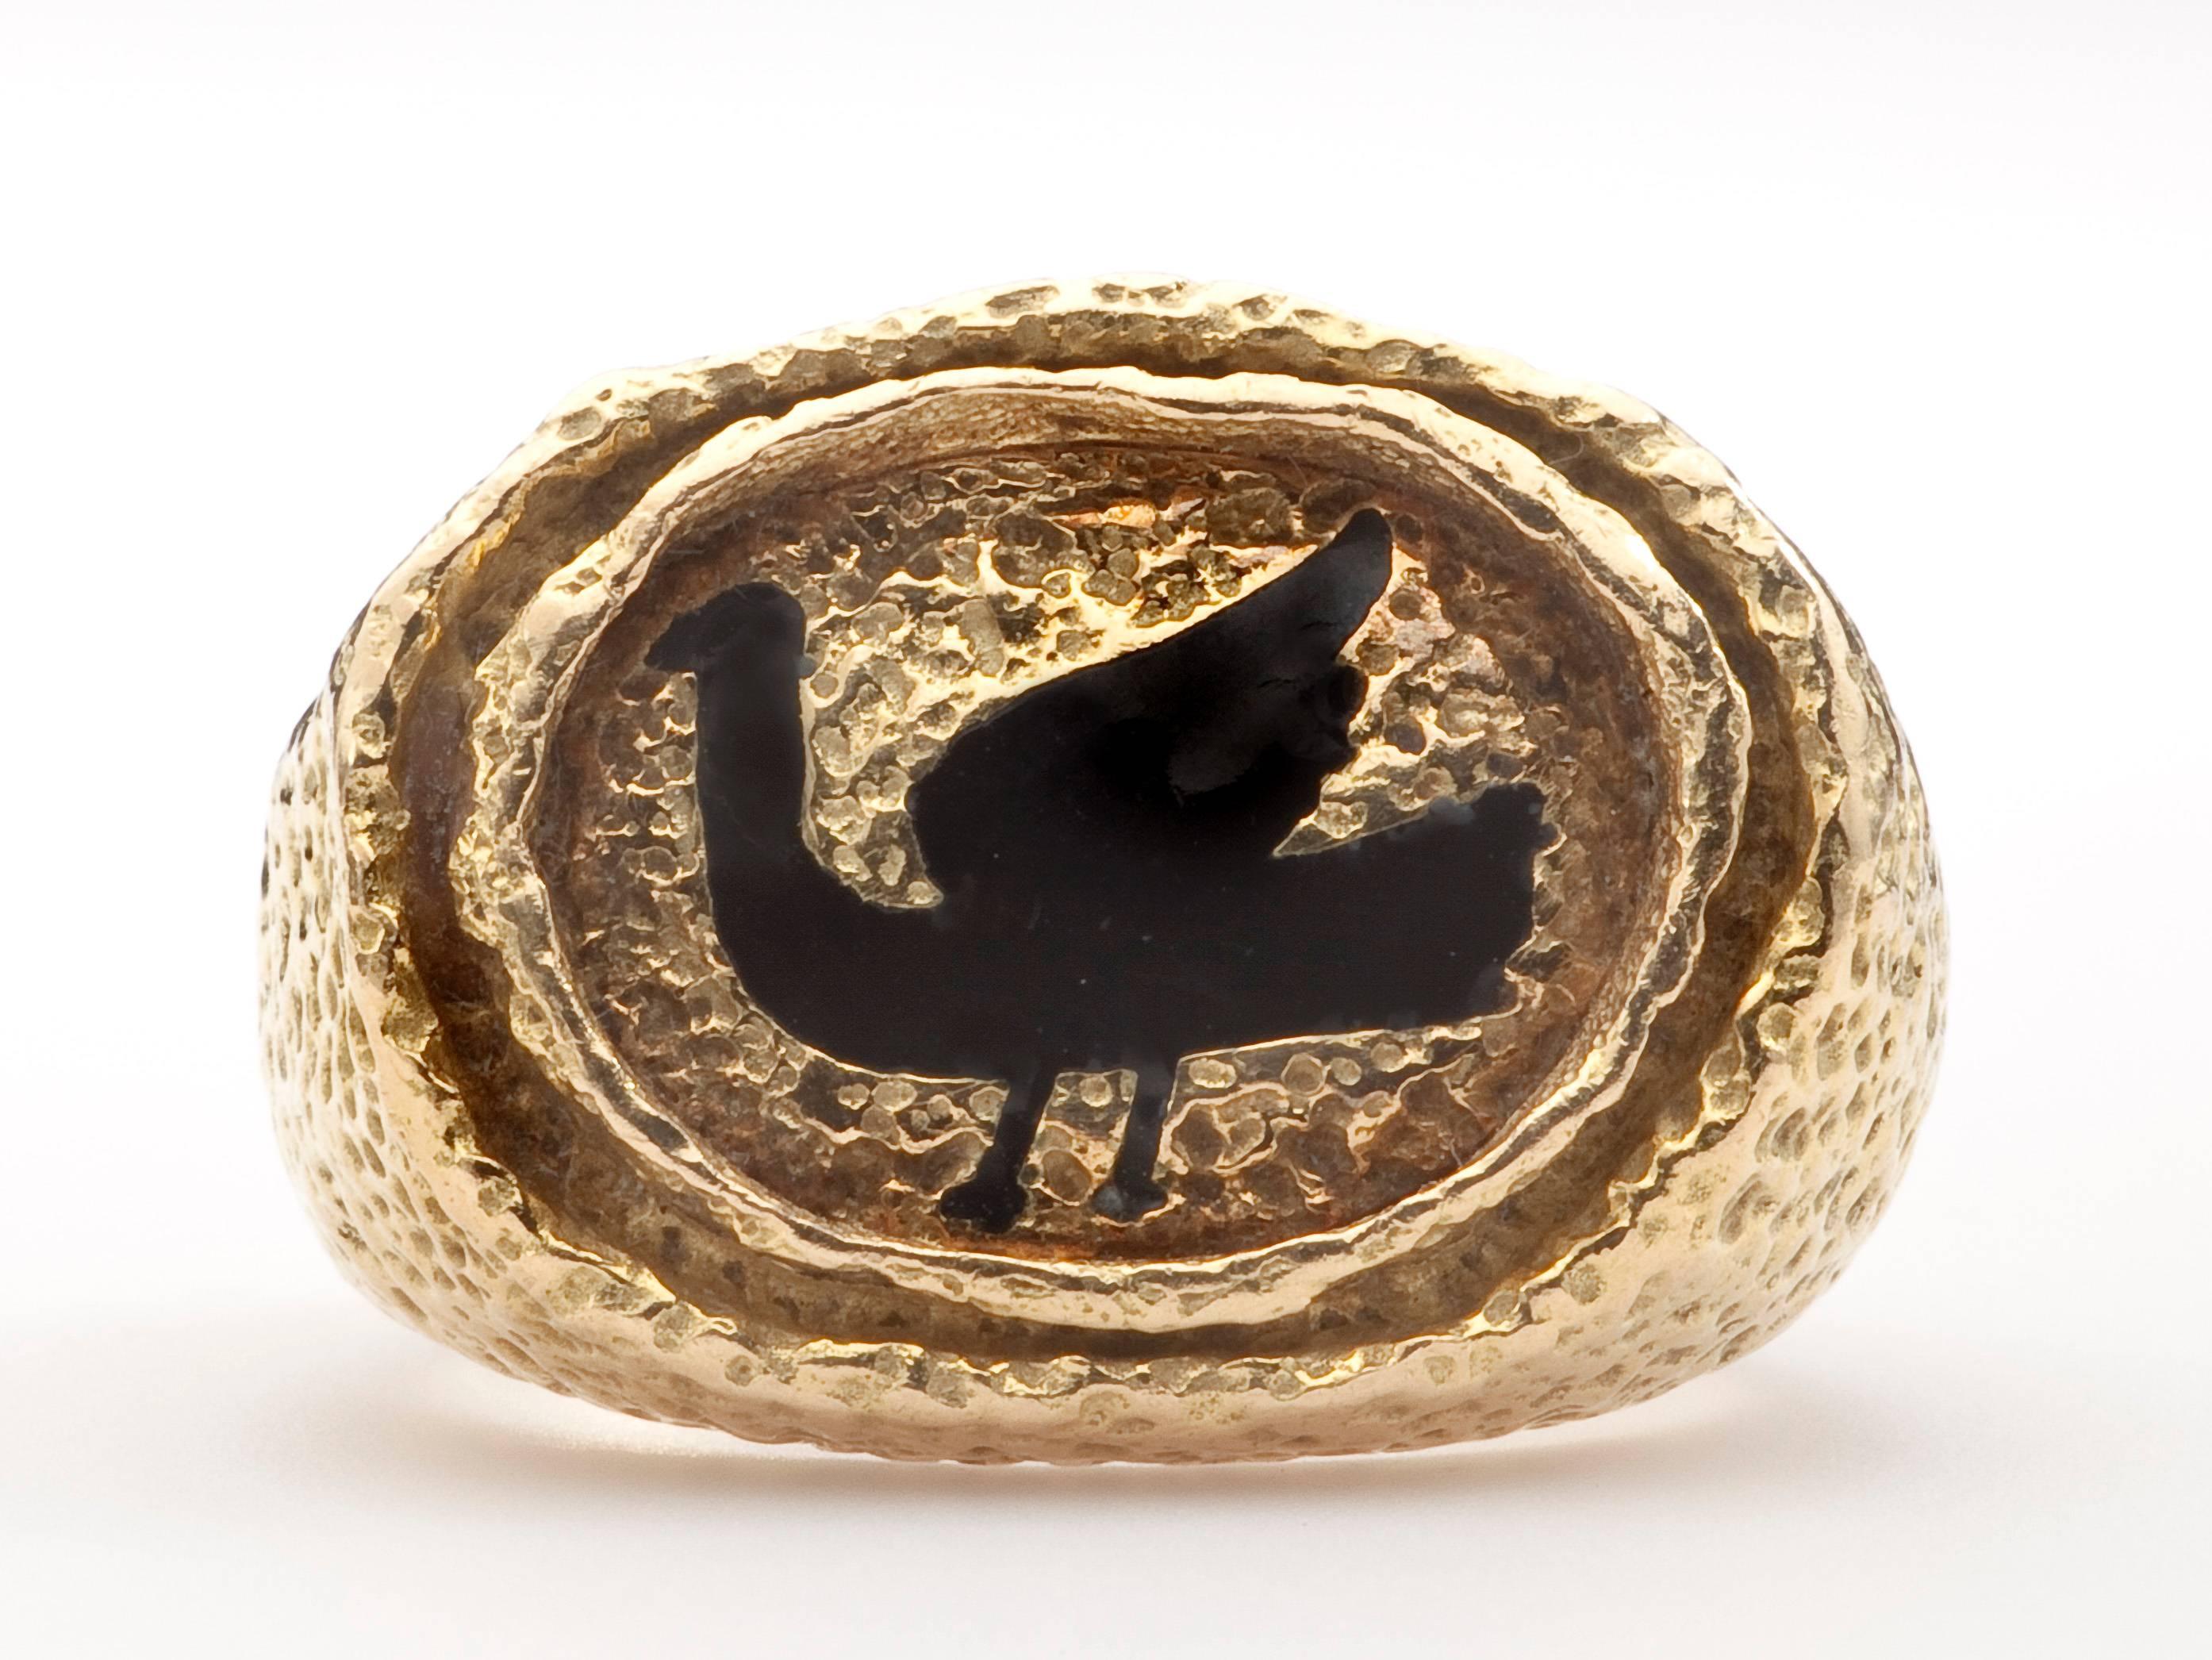 A 22 karat gold ring by artist, Georges Braque (1882 - 1963) showing the Greek mythological figure, Procris.  The high karat gold ring has a textured surface highlighted by a black enamel figure.   Braque turned to designing jewelry in the last two